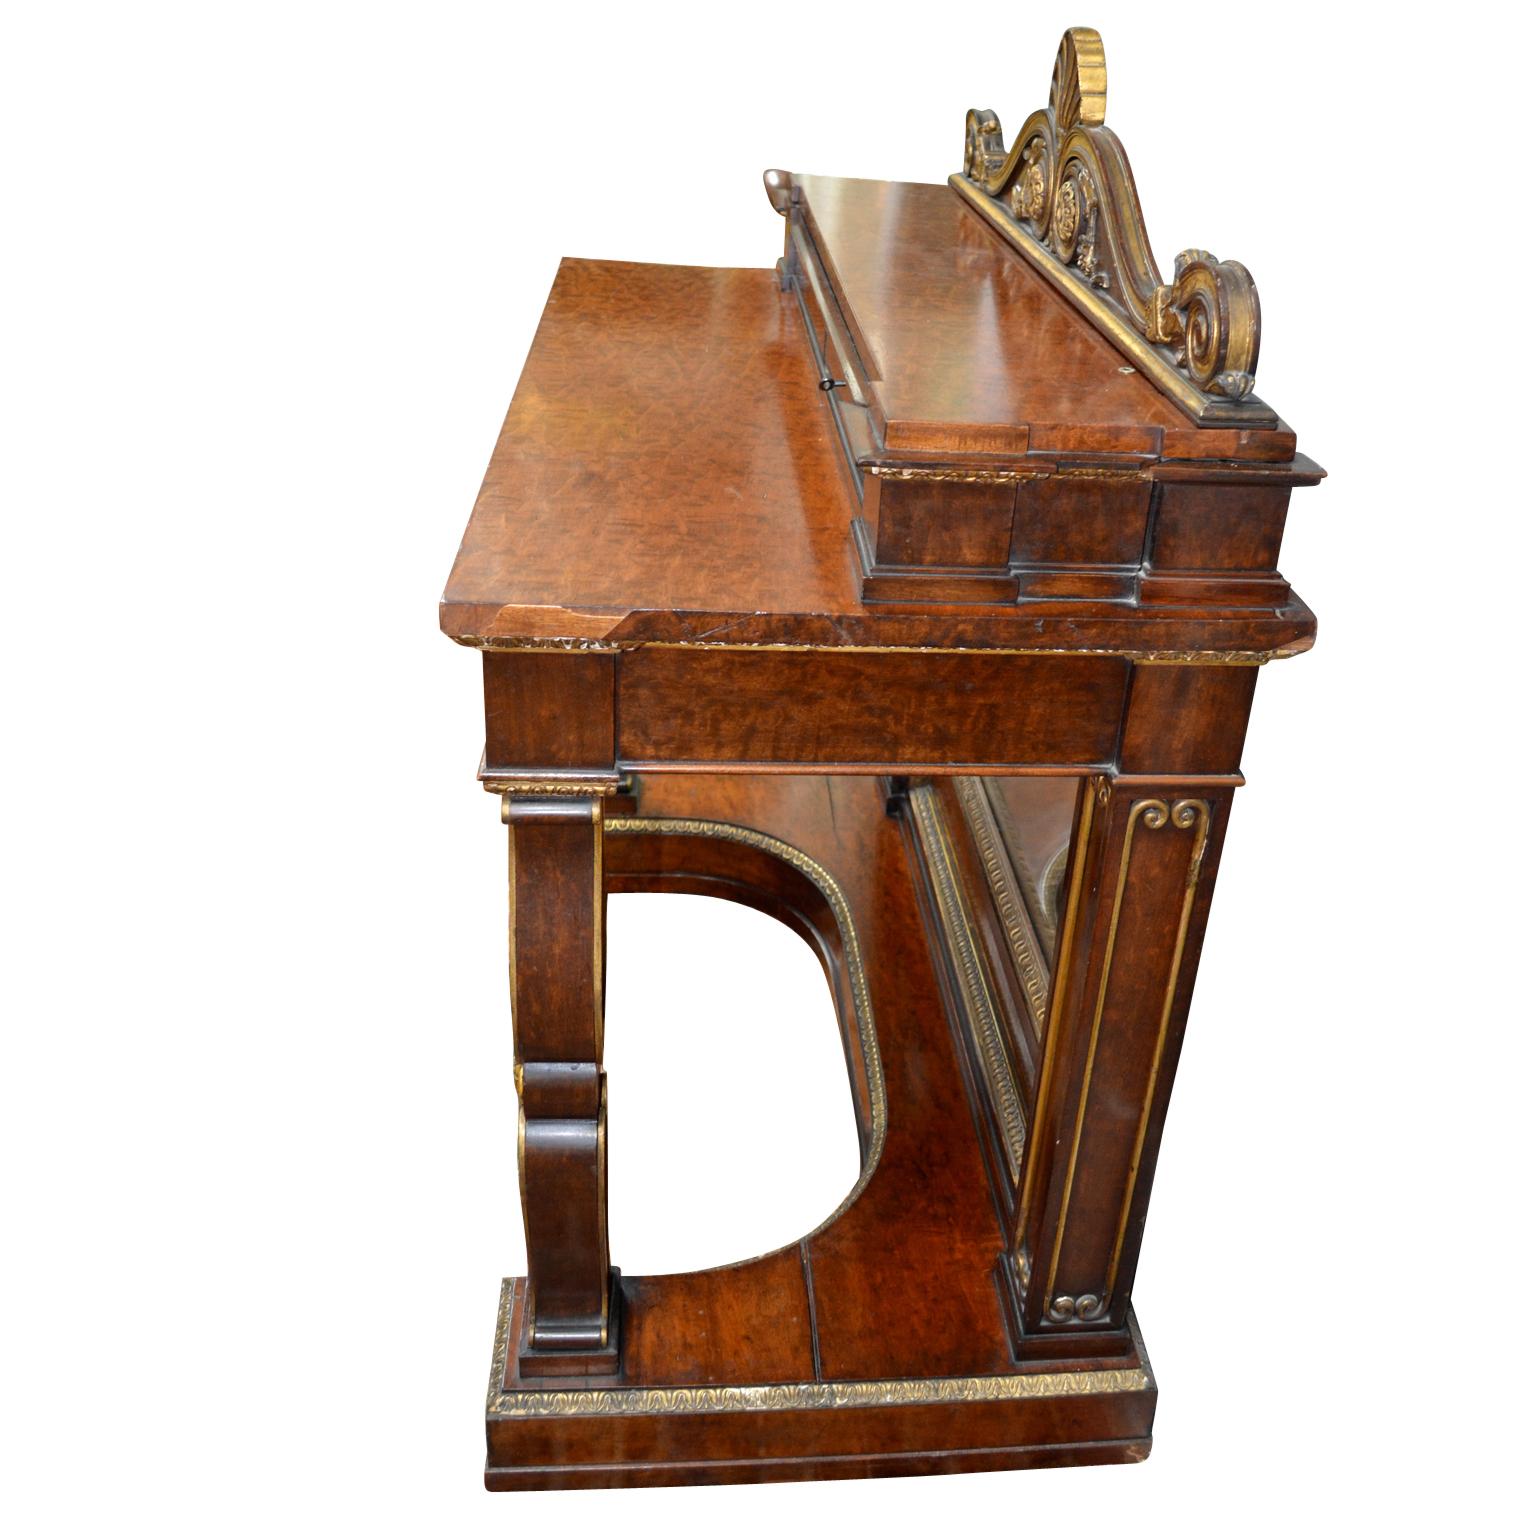 Hand-Crafted  An Exceptional English Regency Dressing Table with a Royal Family Provenance